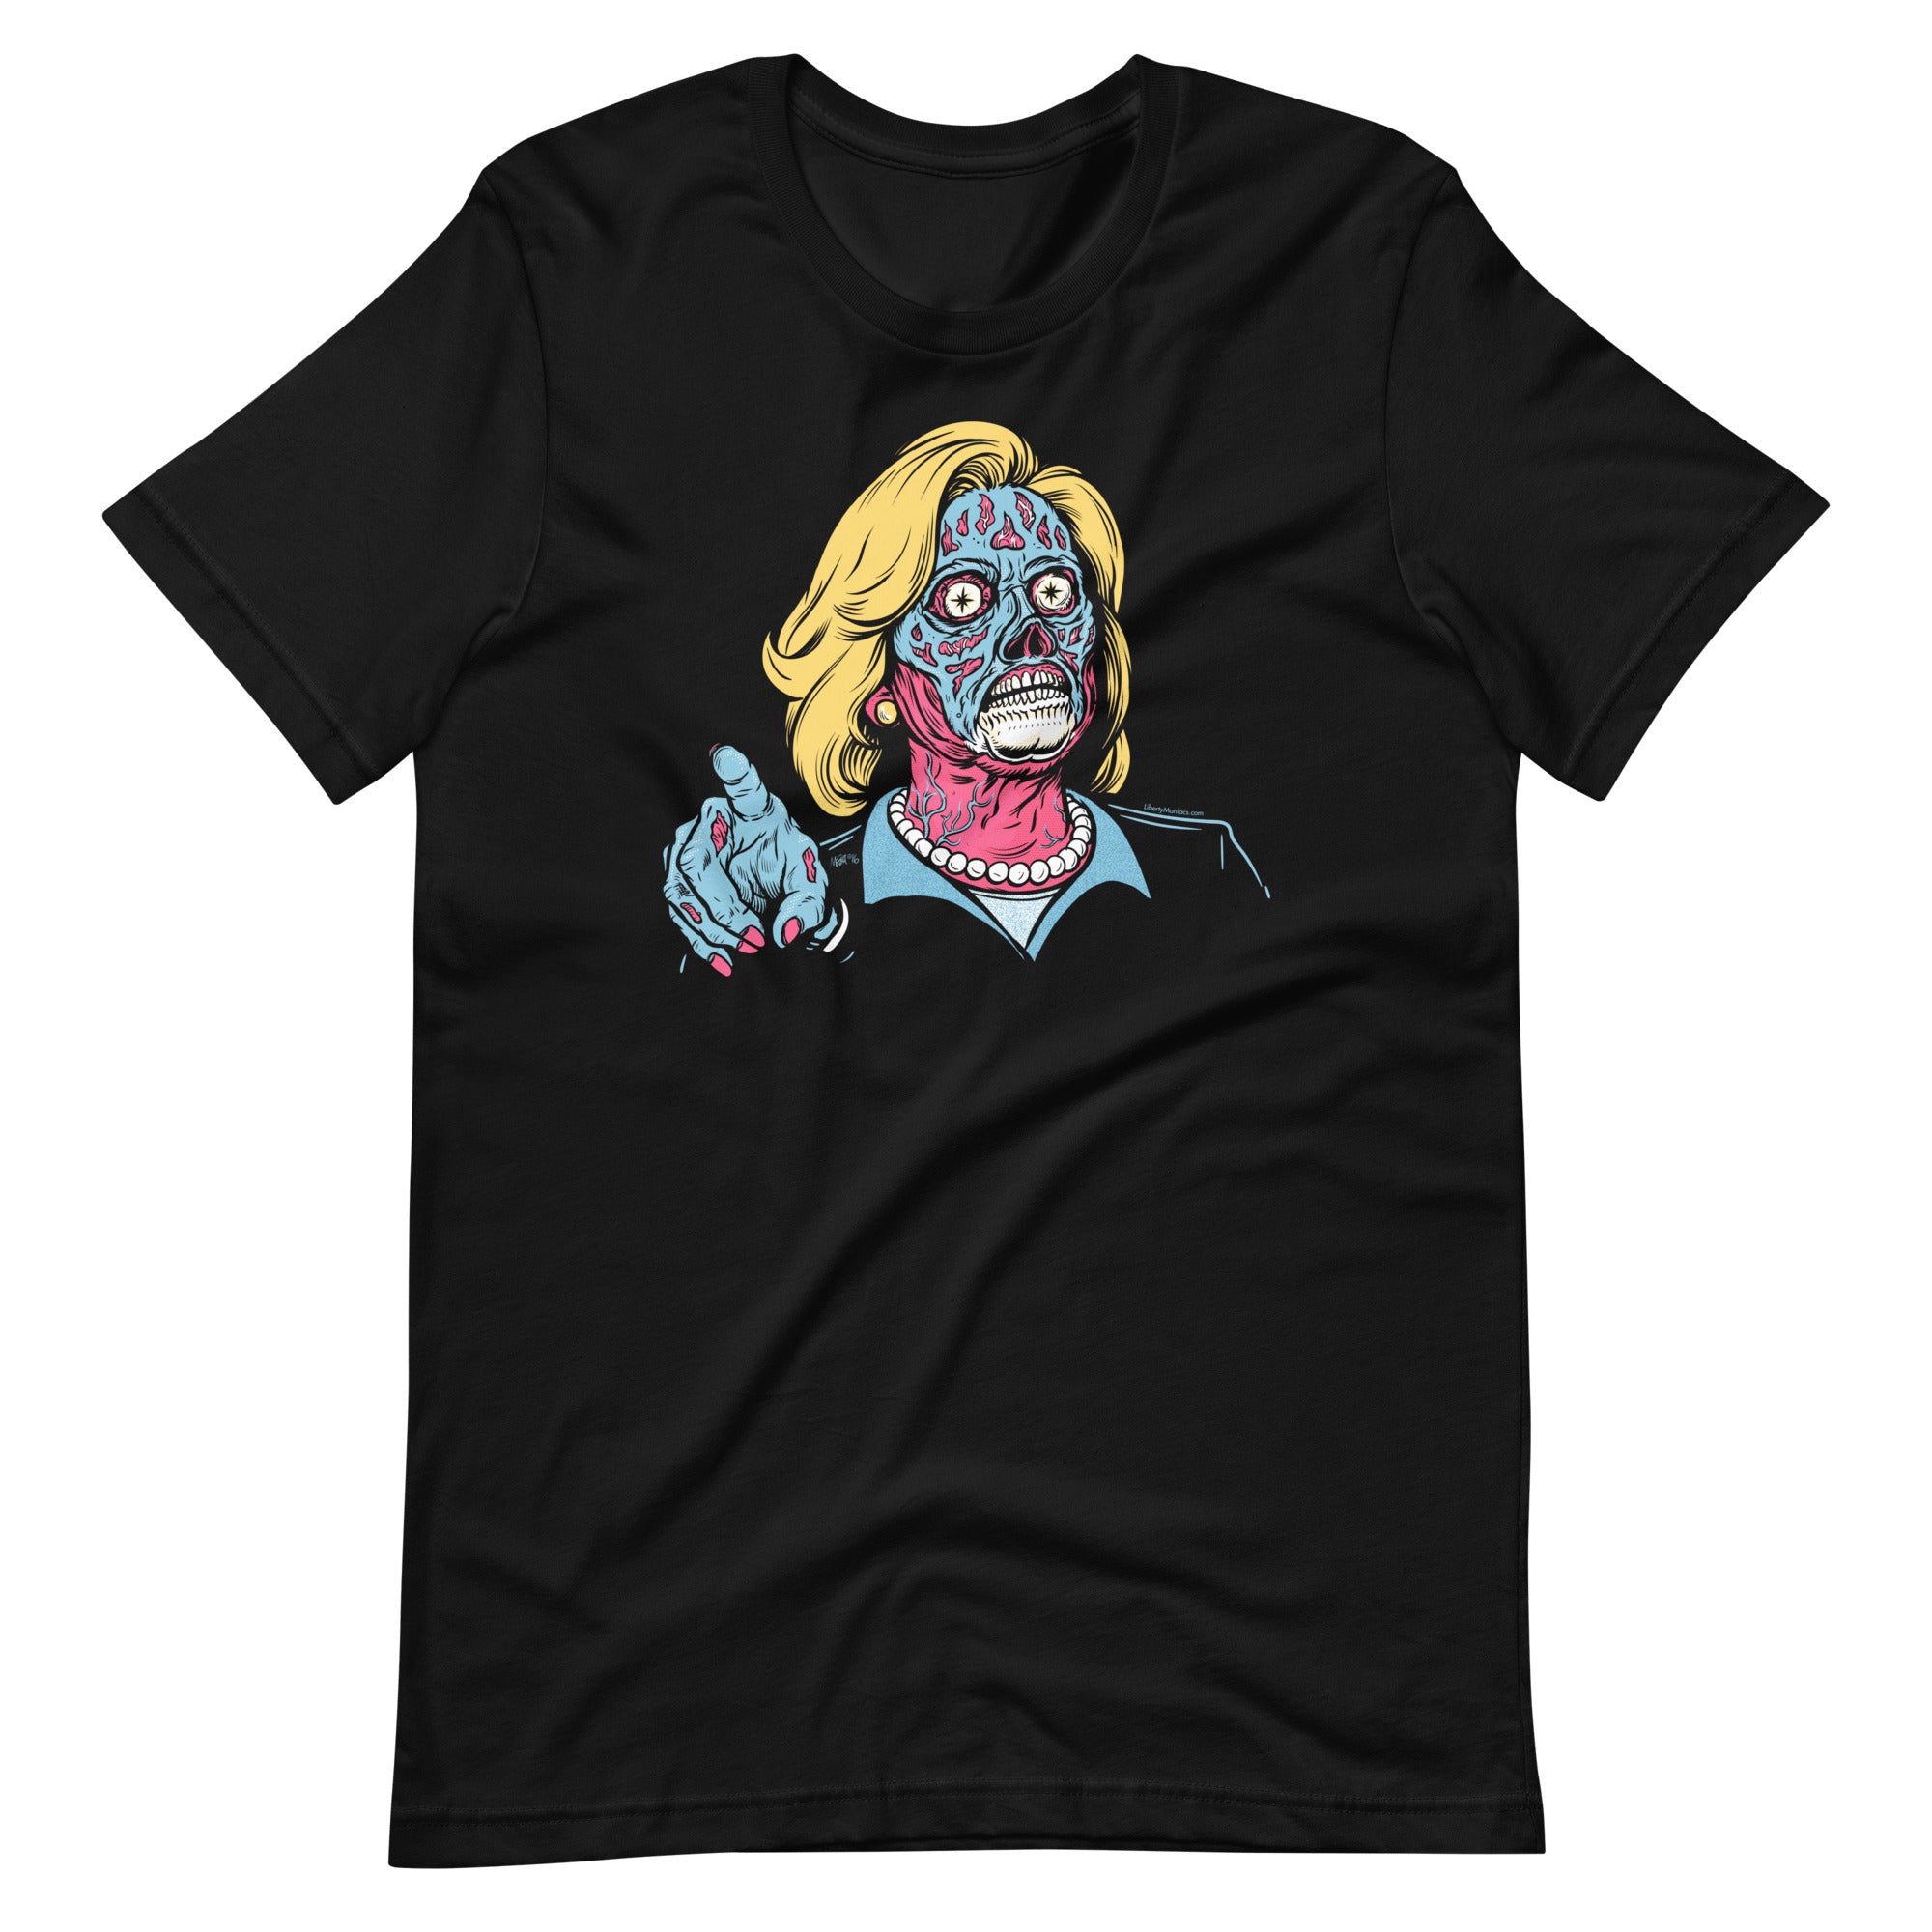 They Live Hillary Clinton T-Shirt